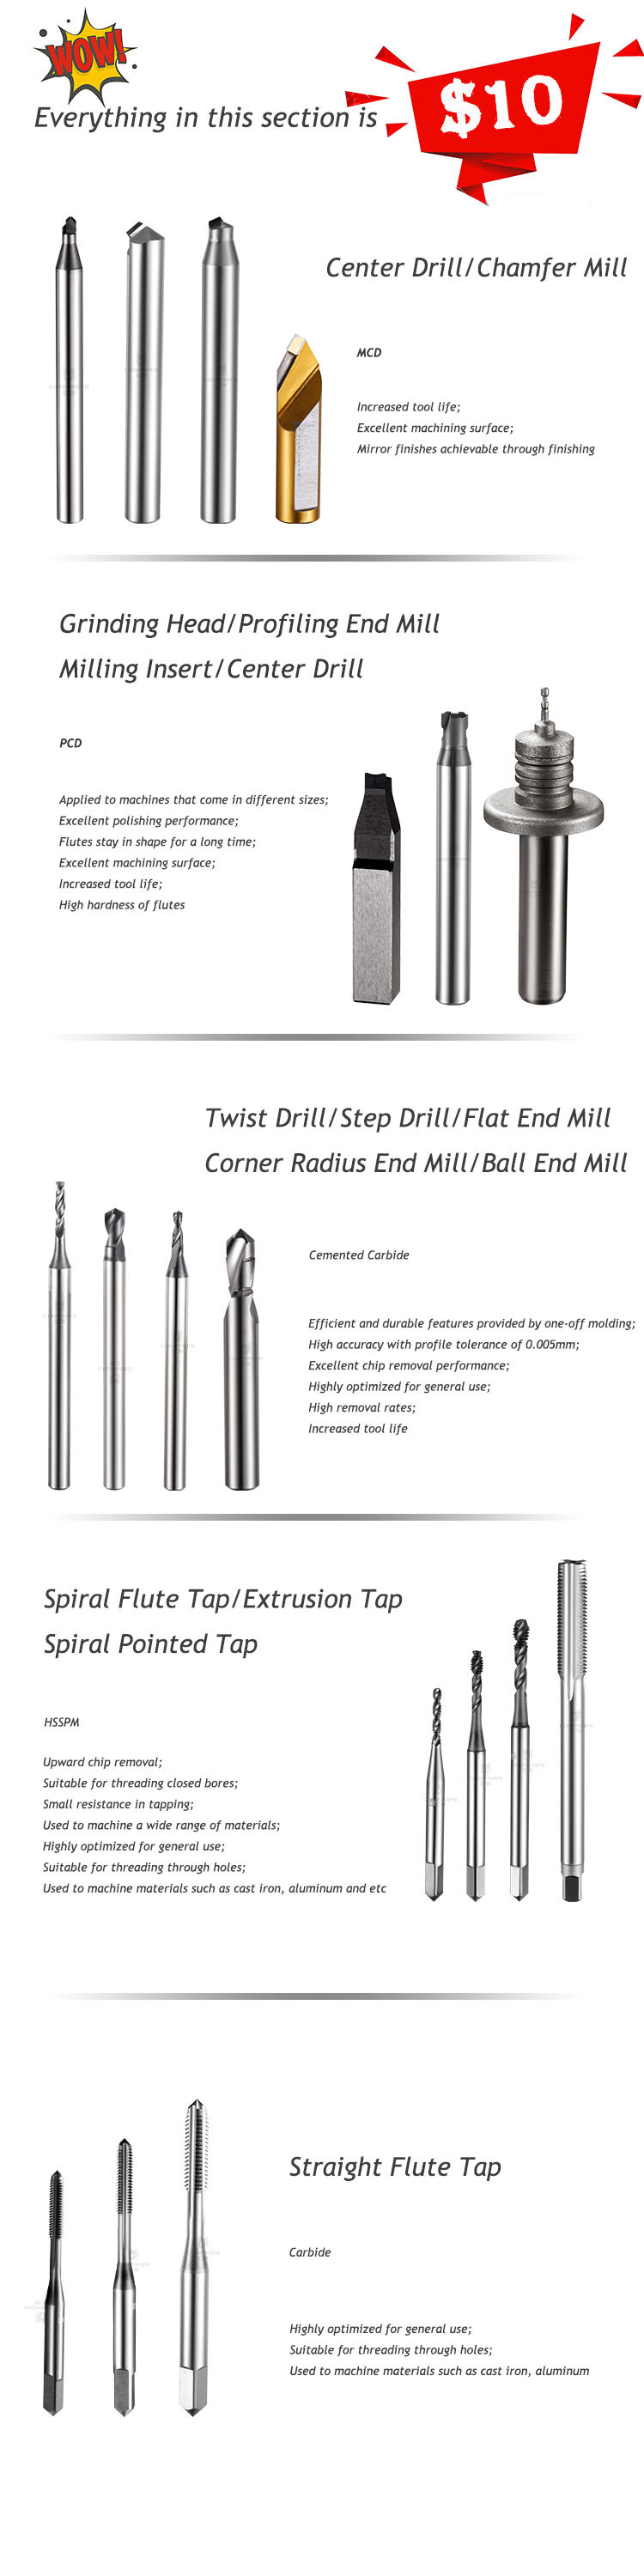 Customized Carbide End Mills Cemented Carbide Flat End Mill for CNC Machine Processing